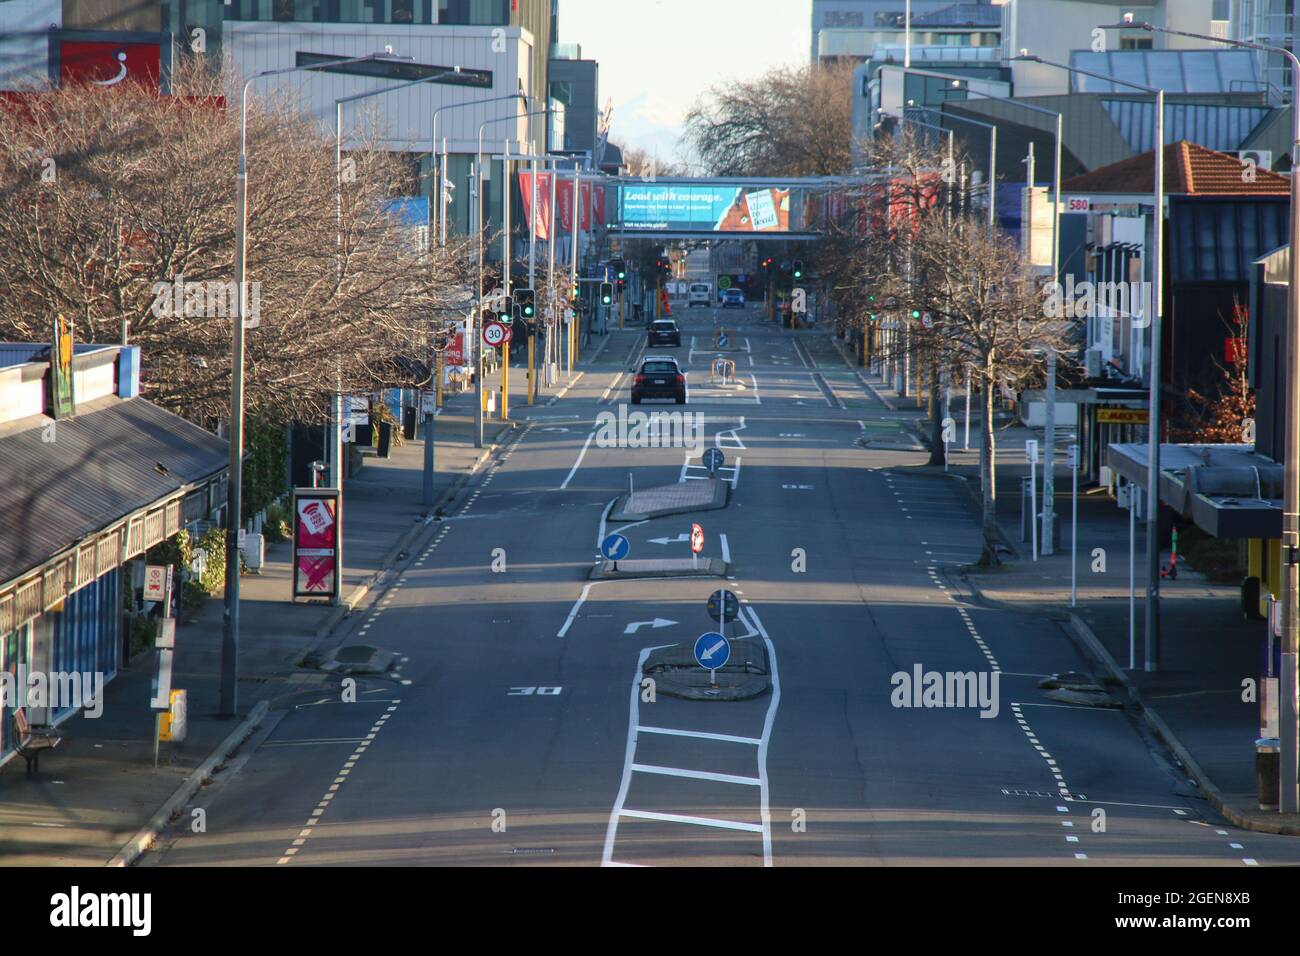 Columbo Street, the main street in central Christchurch is pictured semi-deserted during the lockdown.New Zealand's outbreak of the Delta variant has so far seen 28 confirmed cases in Auckland, and three in Wellington. Prime Minister Jacinda Ardern yesterday placed areas outside Auckland and Coromandel into a further lockdown until 11.59 pm on Tuesday. Deputy Prime Minister Grant Robertson said this morning, “things will get worse before they get better”, and that “there will be more cases”. He said he hadn't yet had the update on today's numbers, but that information would be given at the 1 P Stock Photo